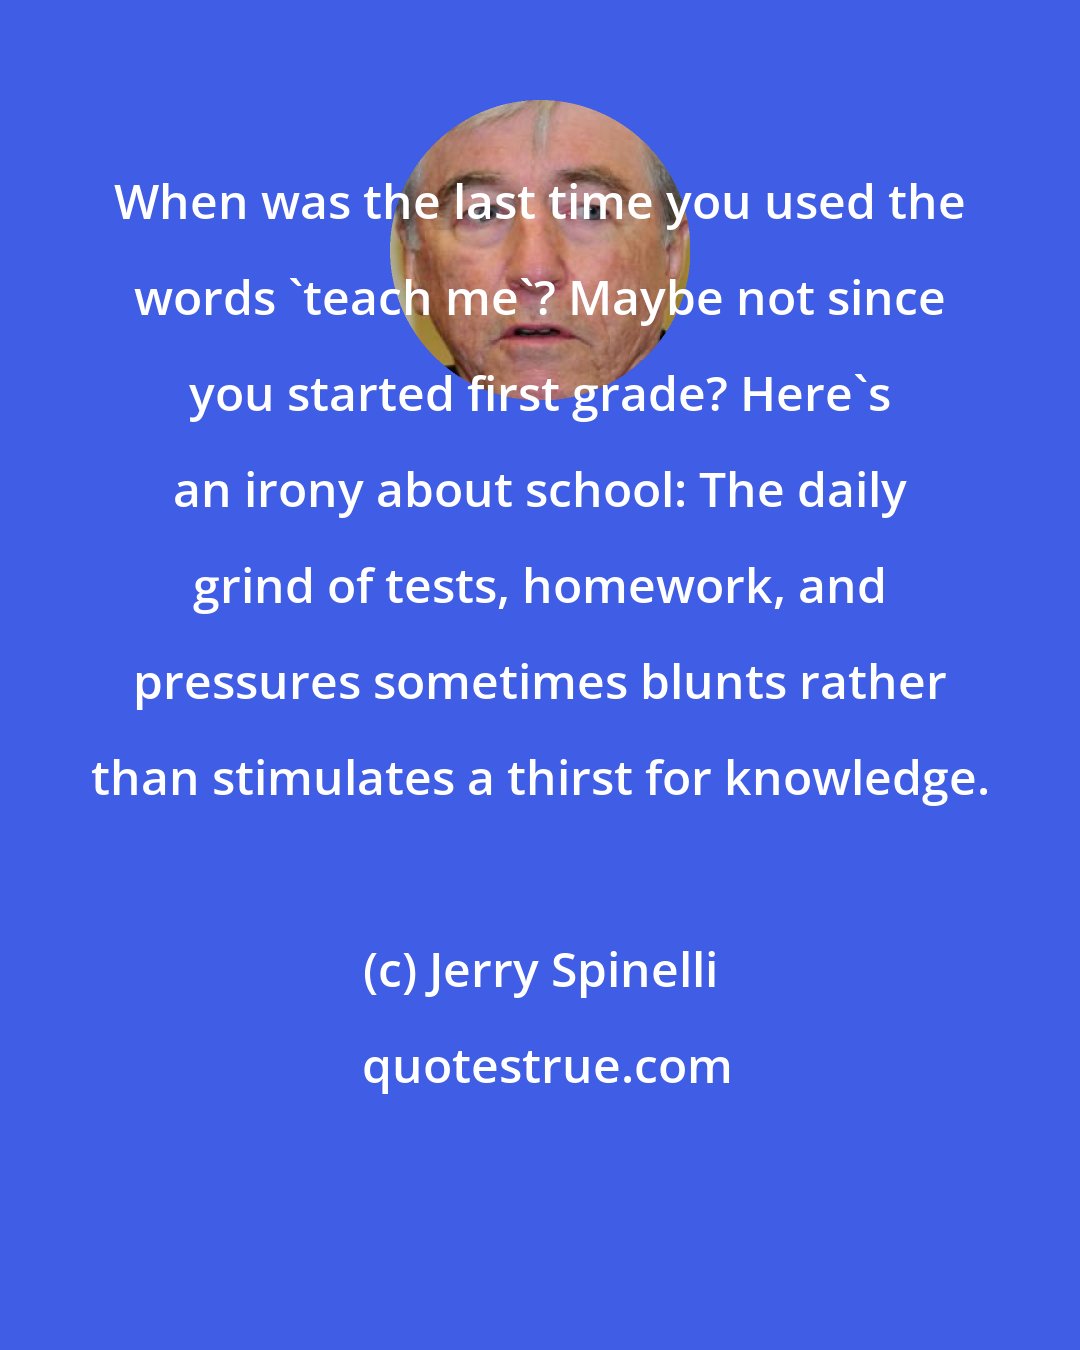 Jerry Spinelli: When was the last time you used the words 'teach me'? Maybe not since you started first grade? Here's an irony about school: The daily grind of tests, homework, and pressures sometimes blunts rather than stimulates a thirst for knowledge.